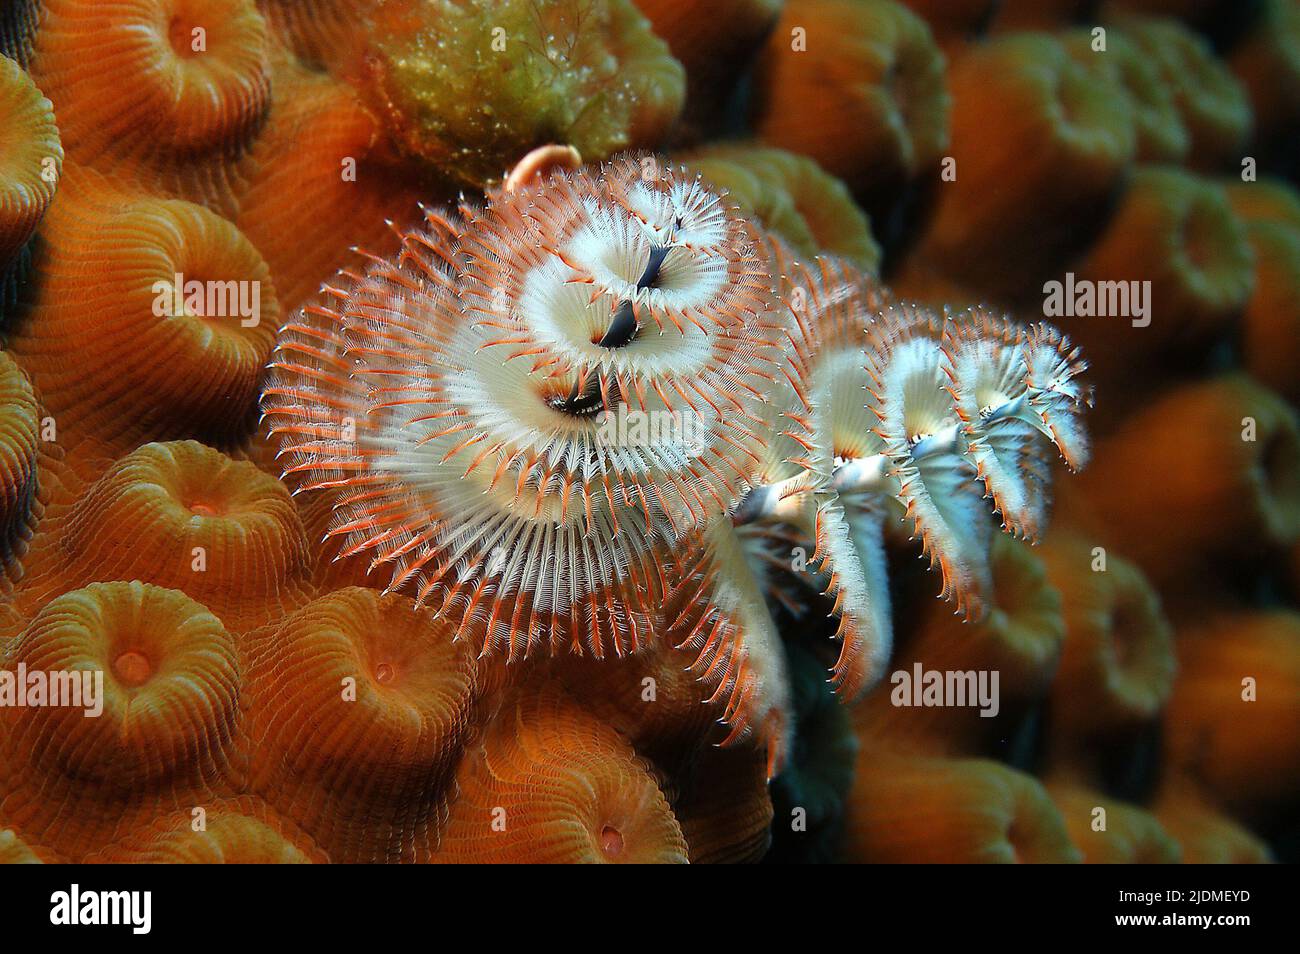 Christmas tree worm or Feather Duster Worm (Spirobranchus giganteus) on a fire coral, Little Cayman, Cayman islands, Caribbean Stock Photo